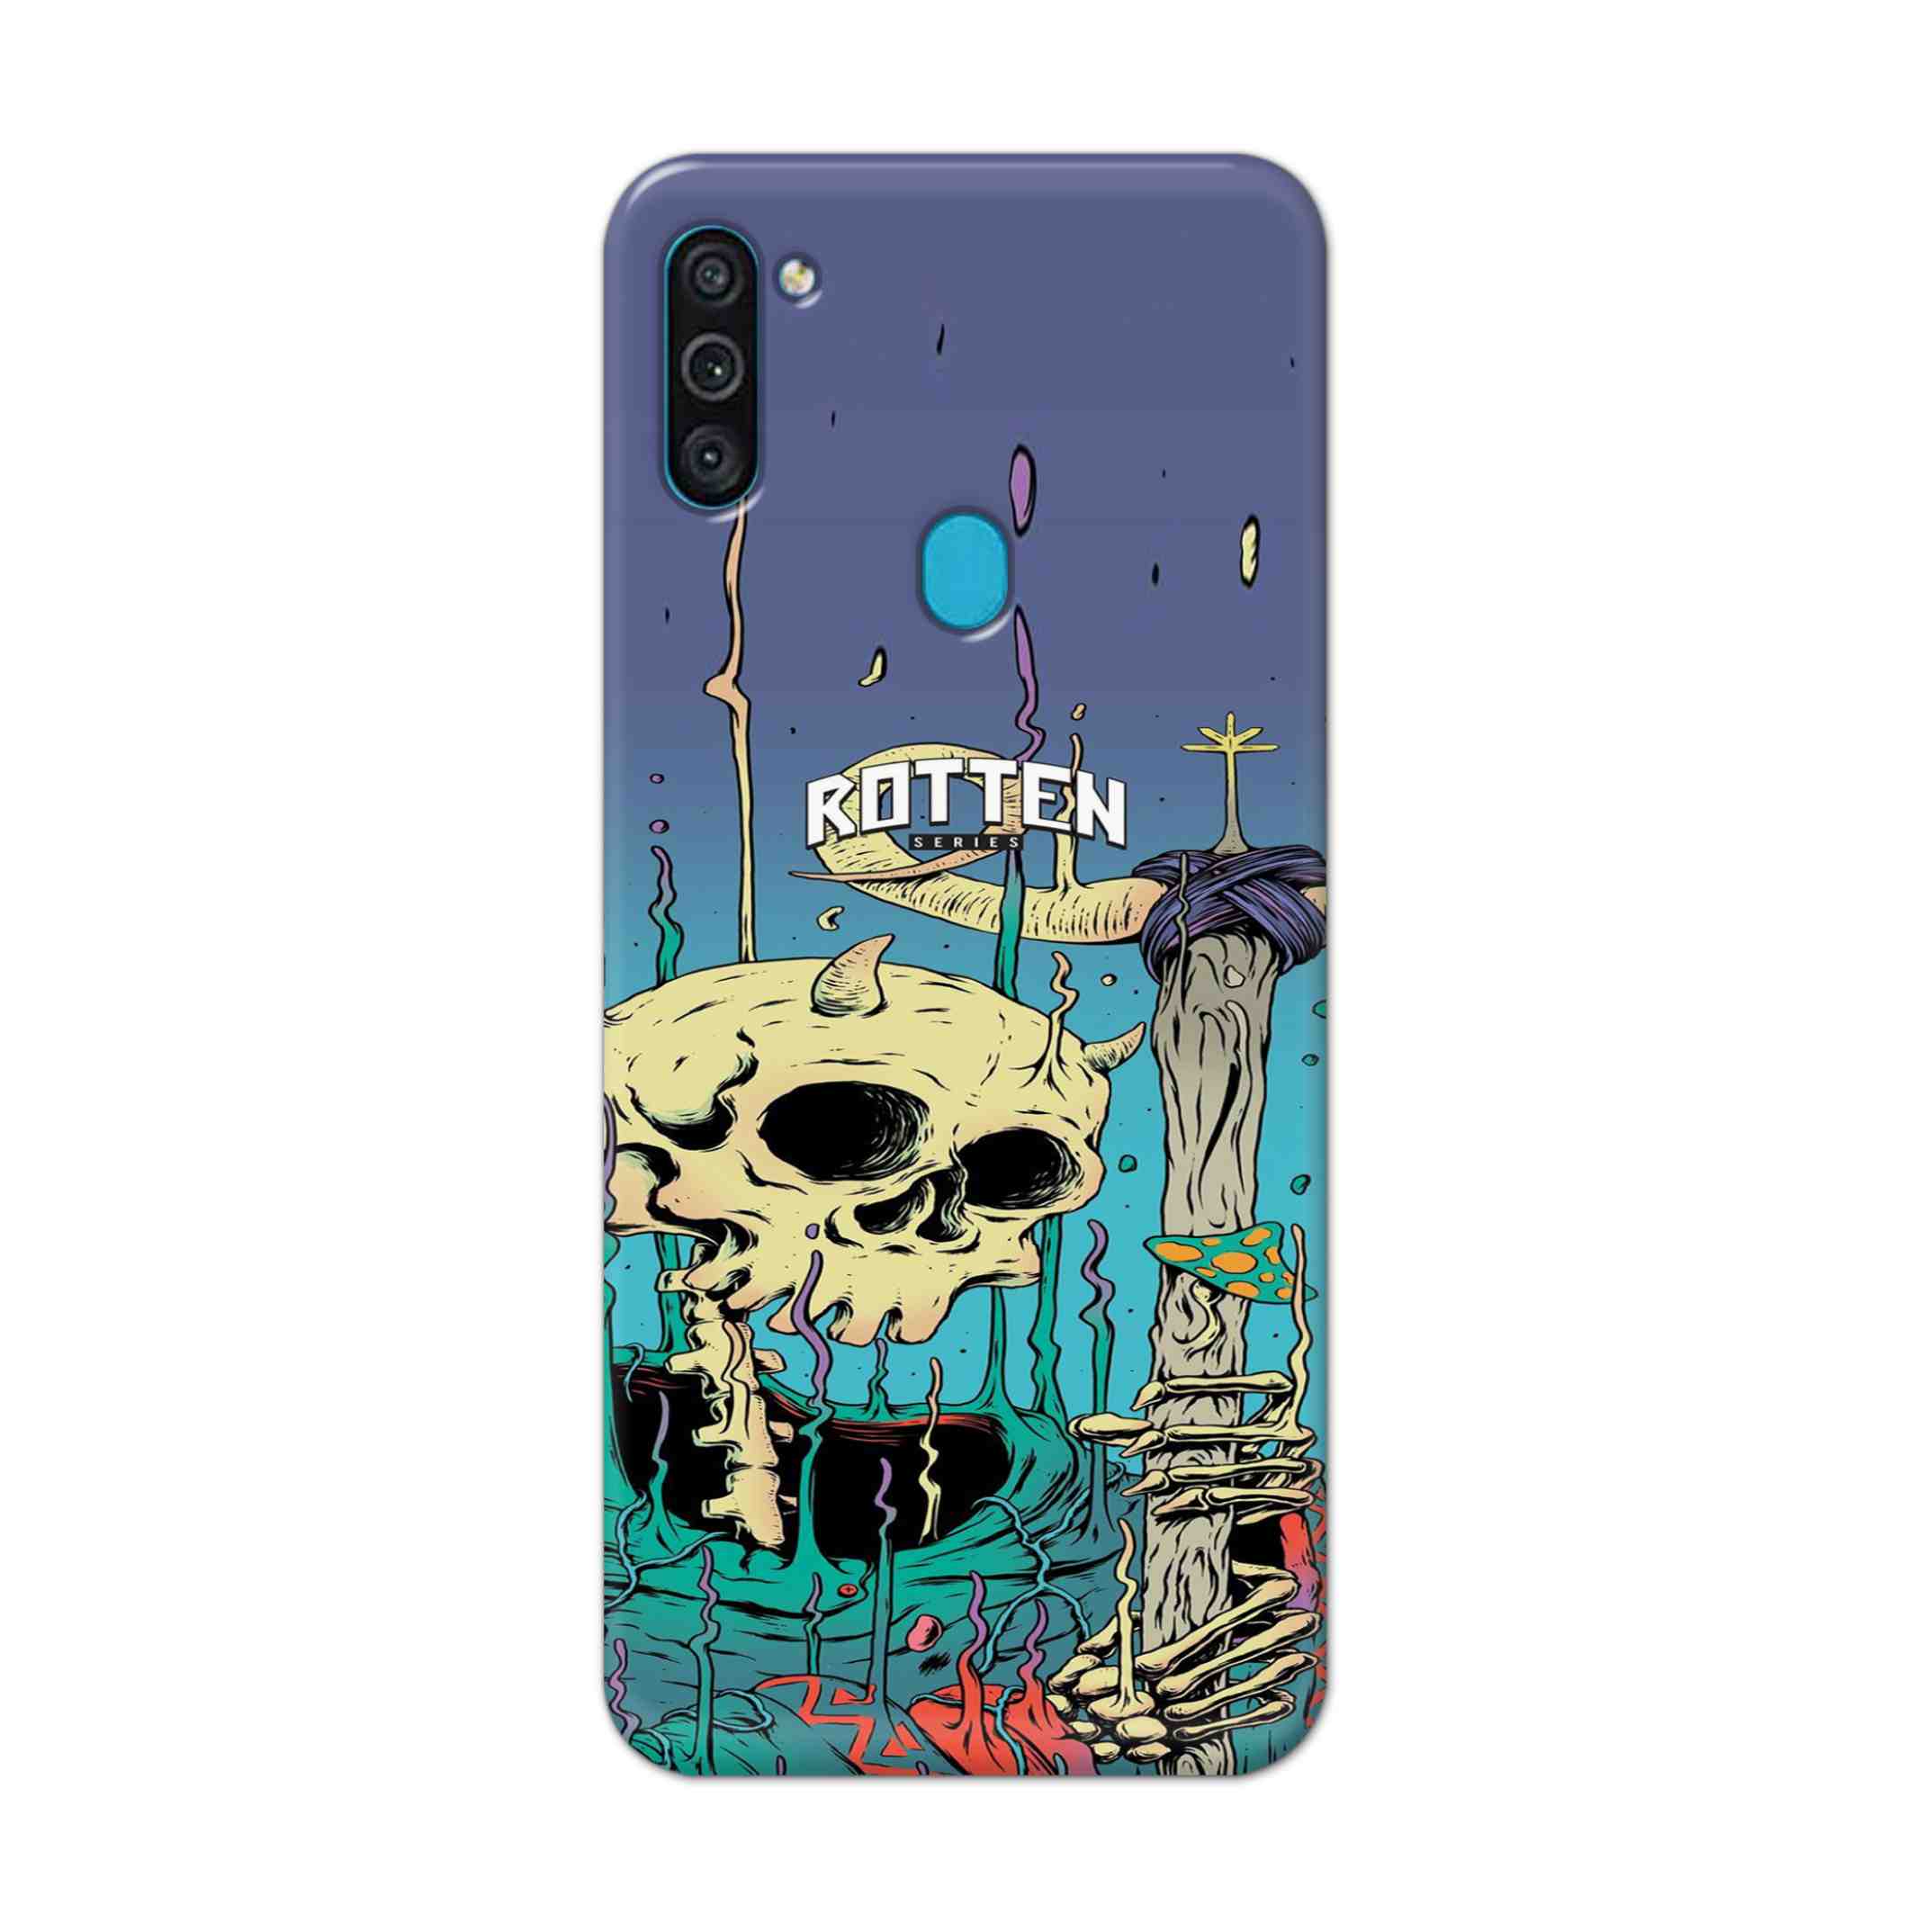 Buy Skull Hard Back Mobile Phone Case Cover For Samsung Galaxy M11 Online